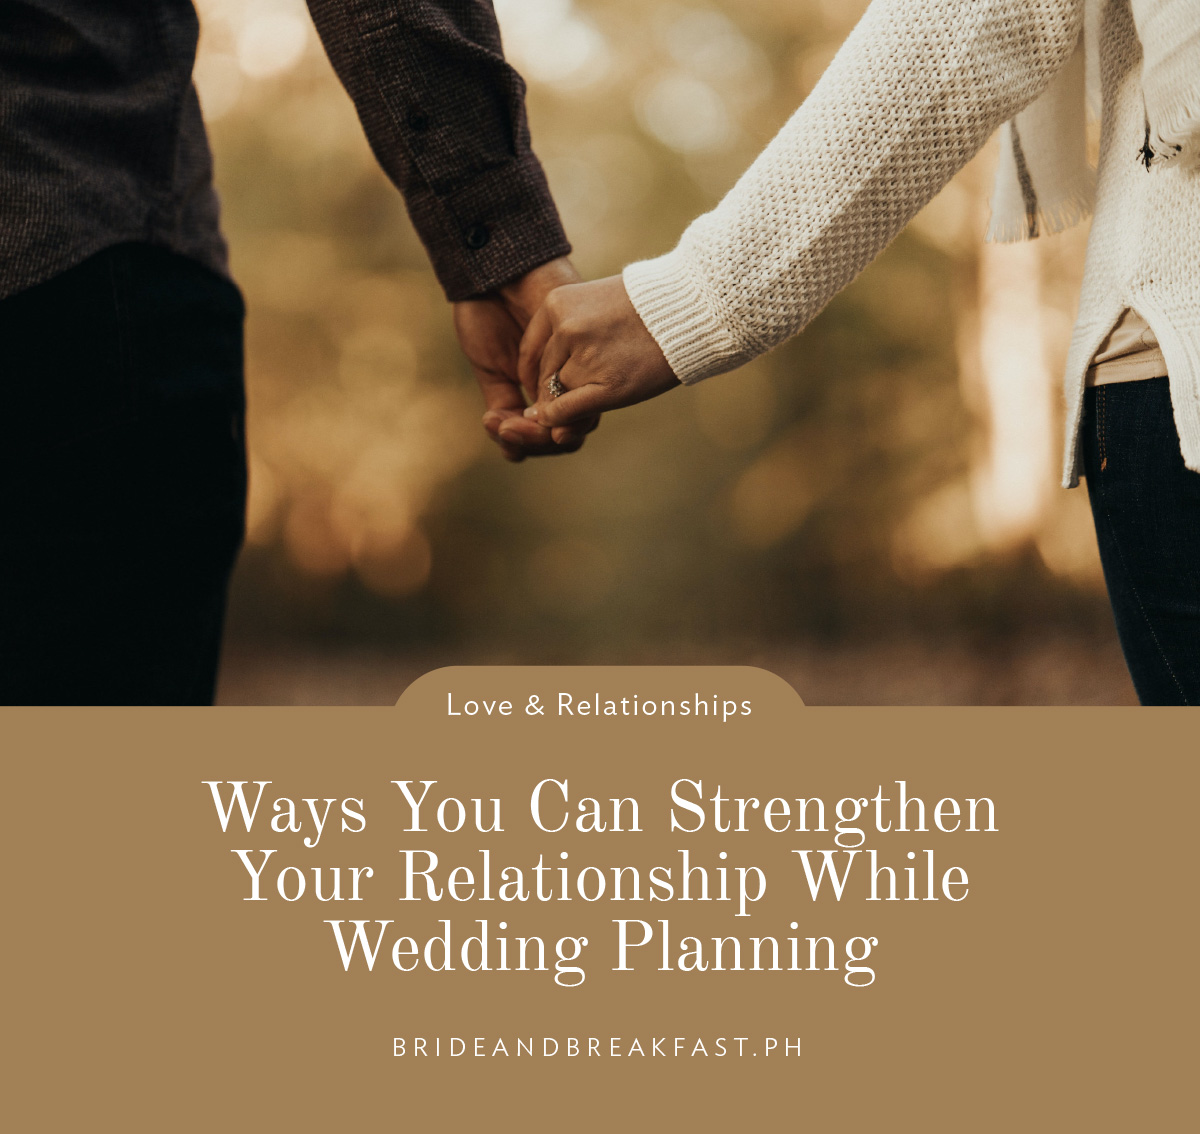 10 Ways You Can Strengthen Your Relationship While Wedding Planning